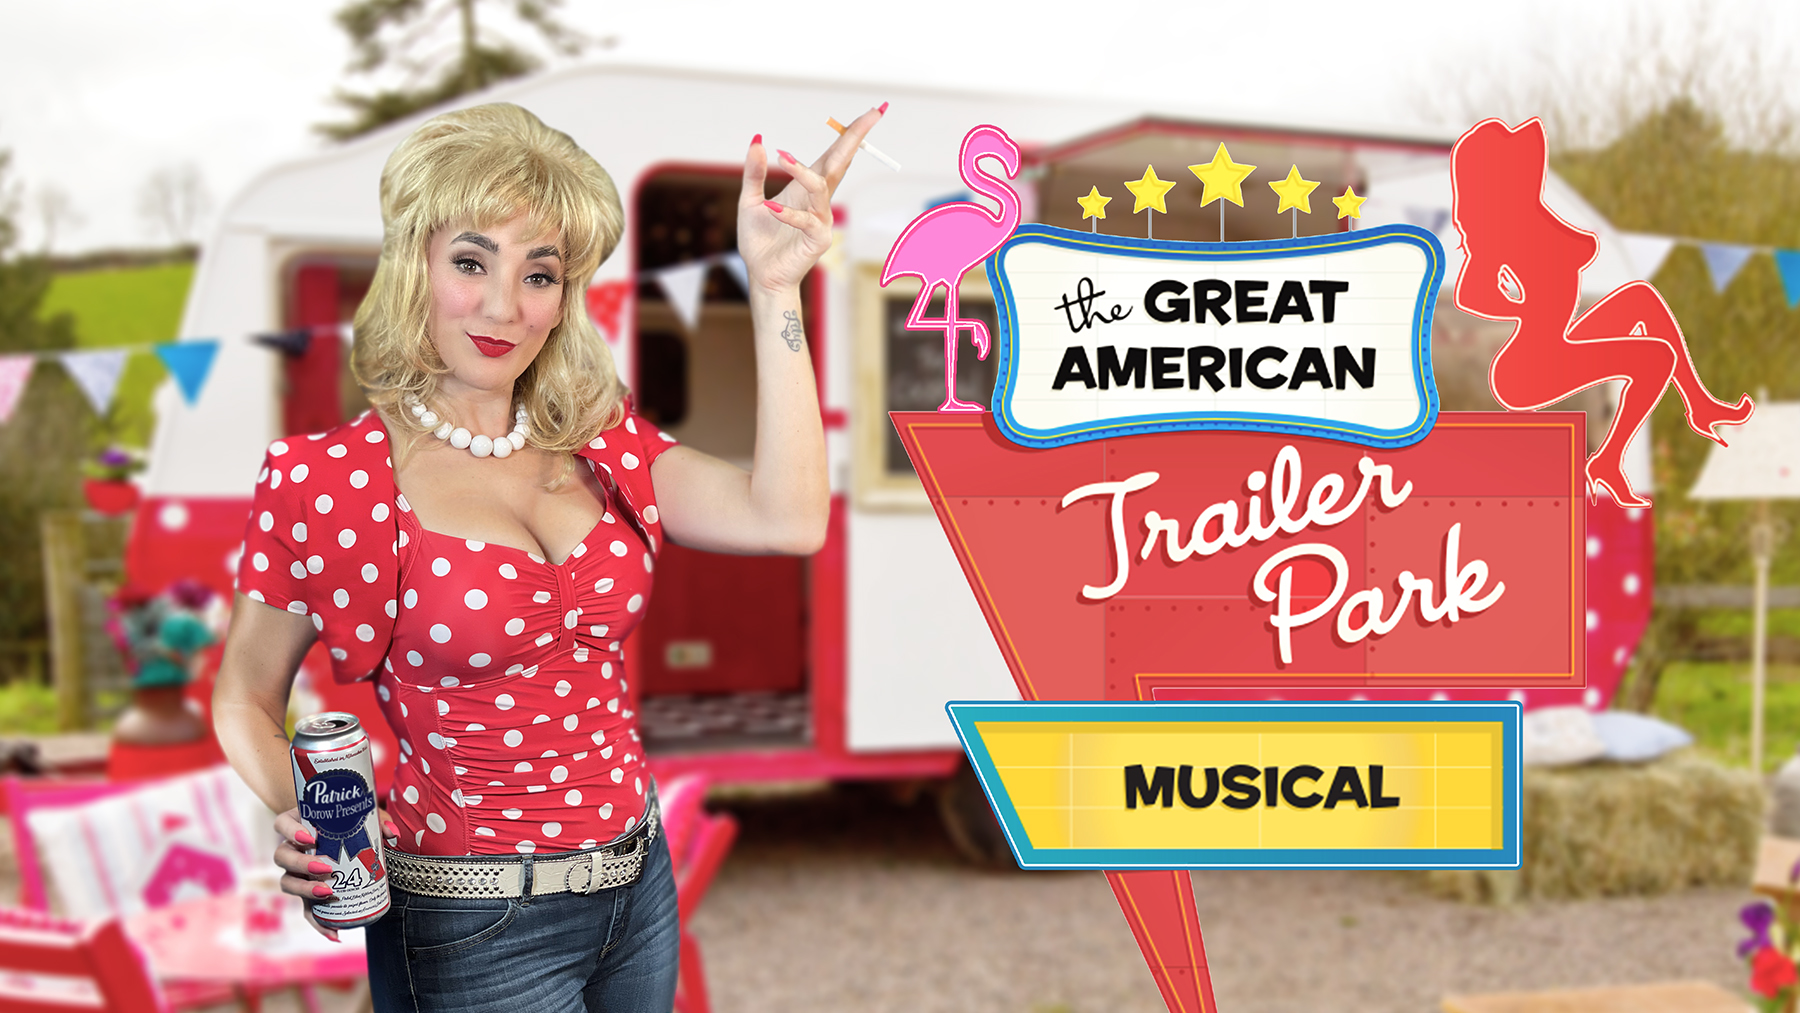 THE GREAT AMERICAN TRAILER PARK MUSICAL to be Presented At Rochester Opera House in September 